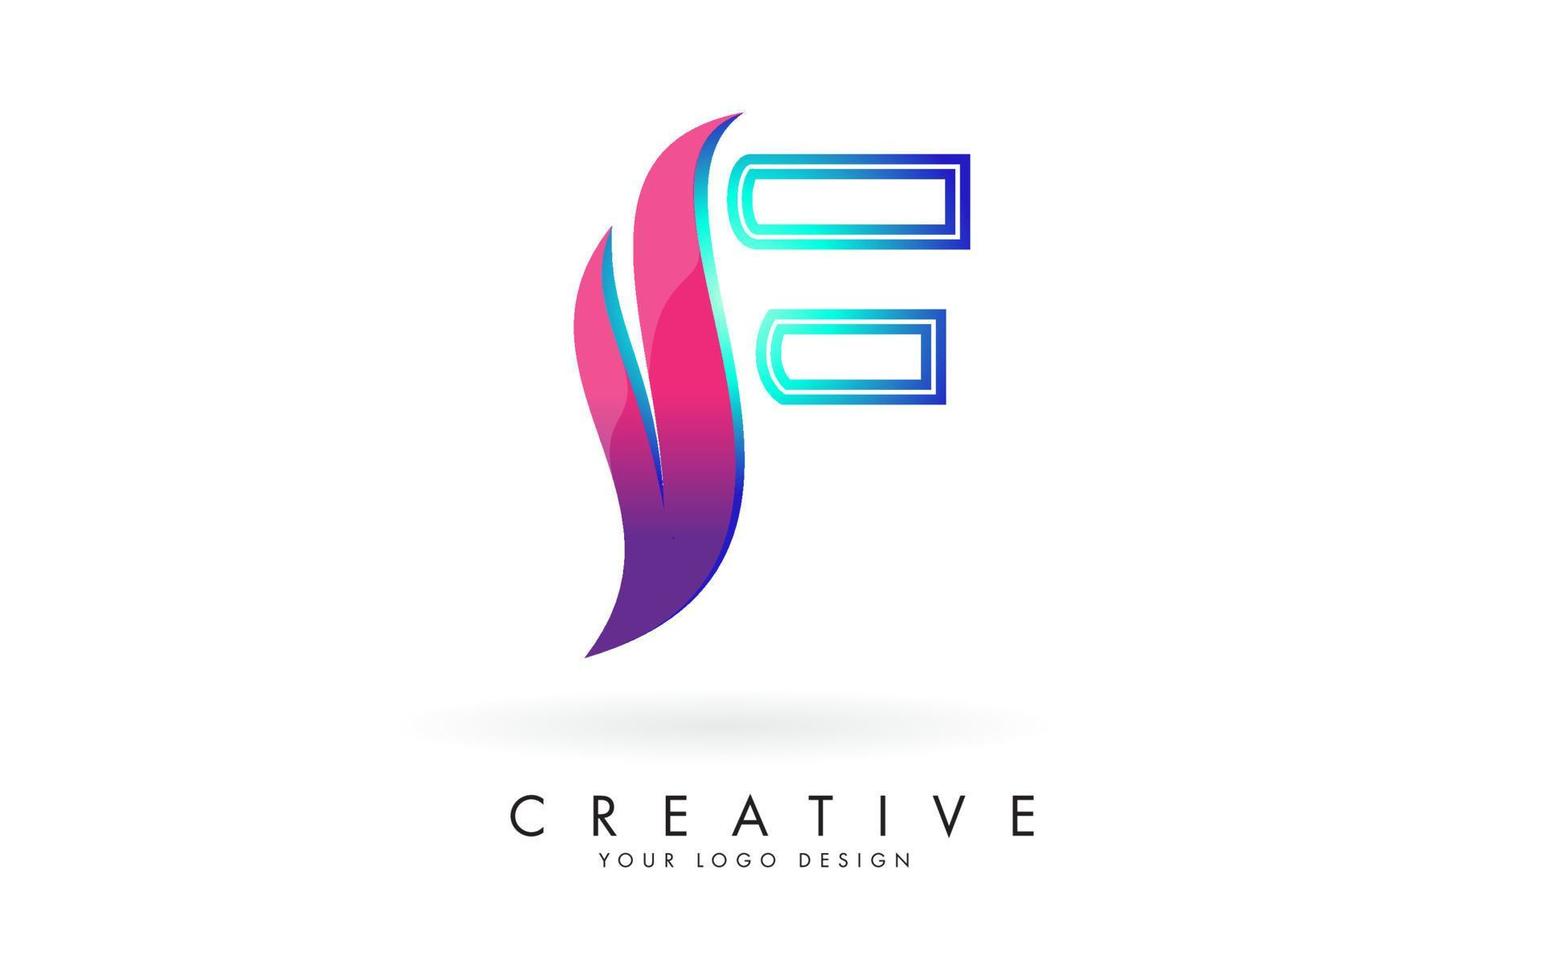 Outline Vector illustration of abstract letter F with colorful flames and gradient Swoosh design.